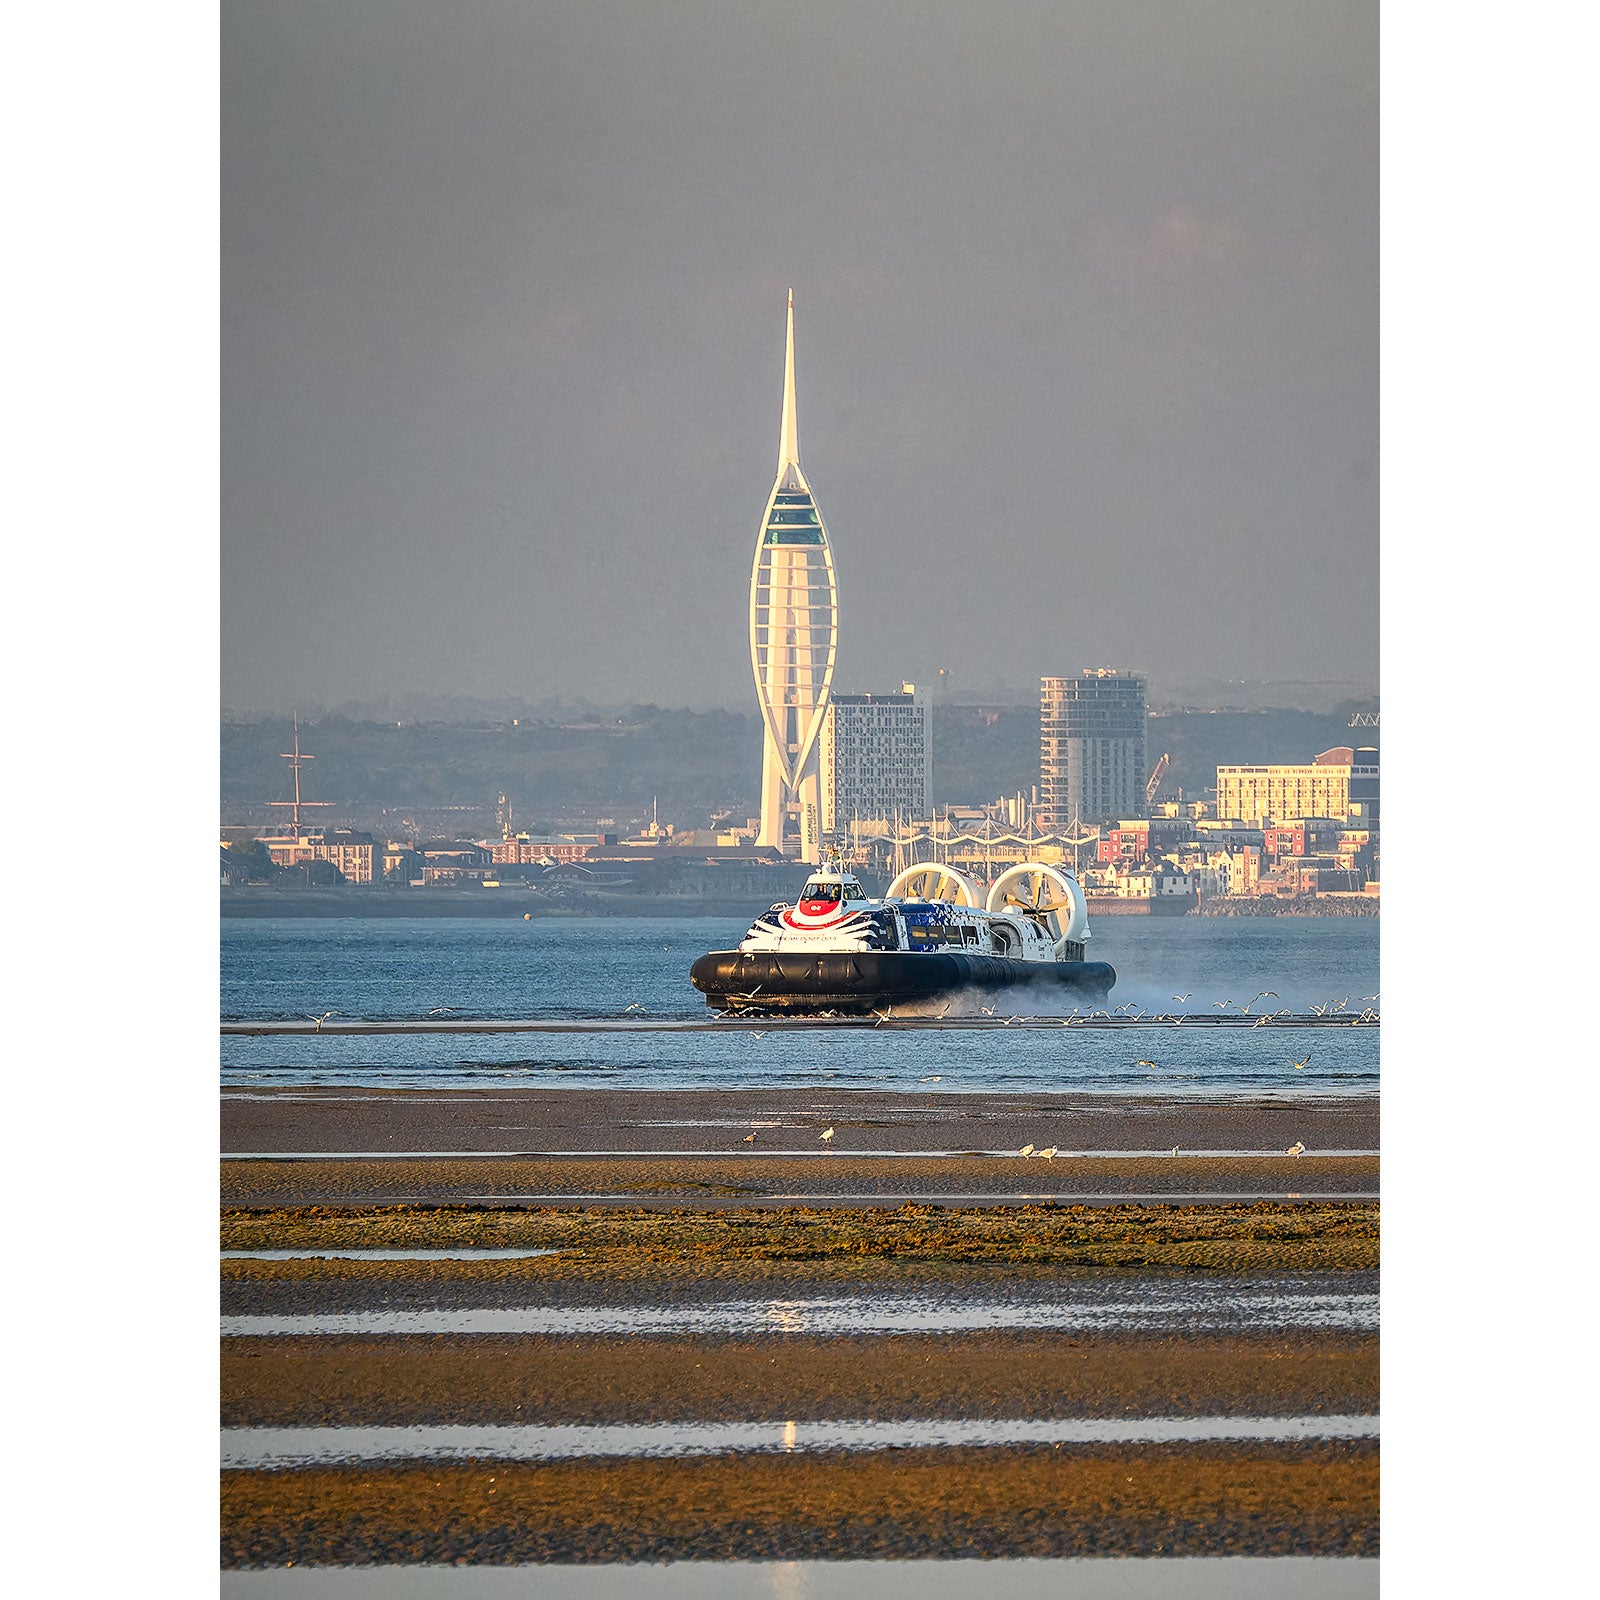 A Incoming Hovercraft travels across the water in the foreground with the iconic Spinnaker Tower in the background, near the Isle of Wight by Available Light Photography.